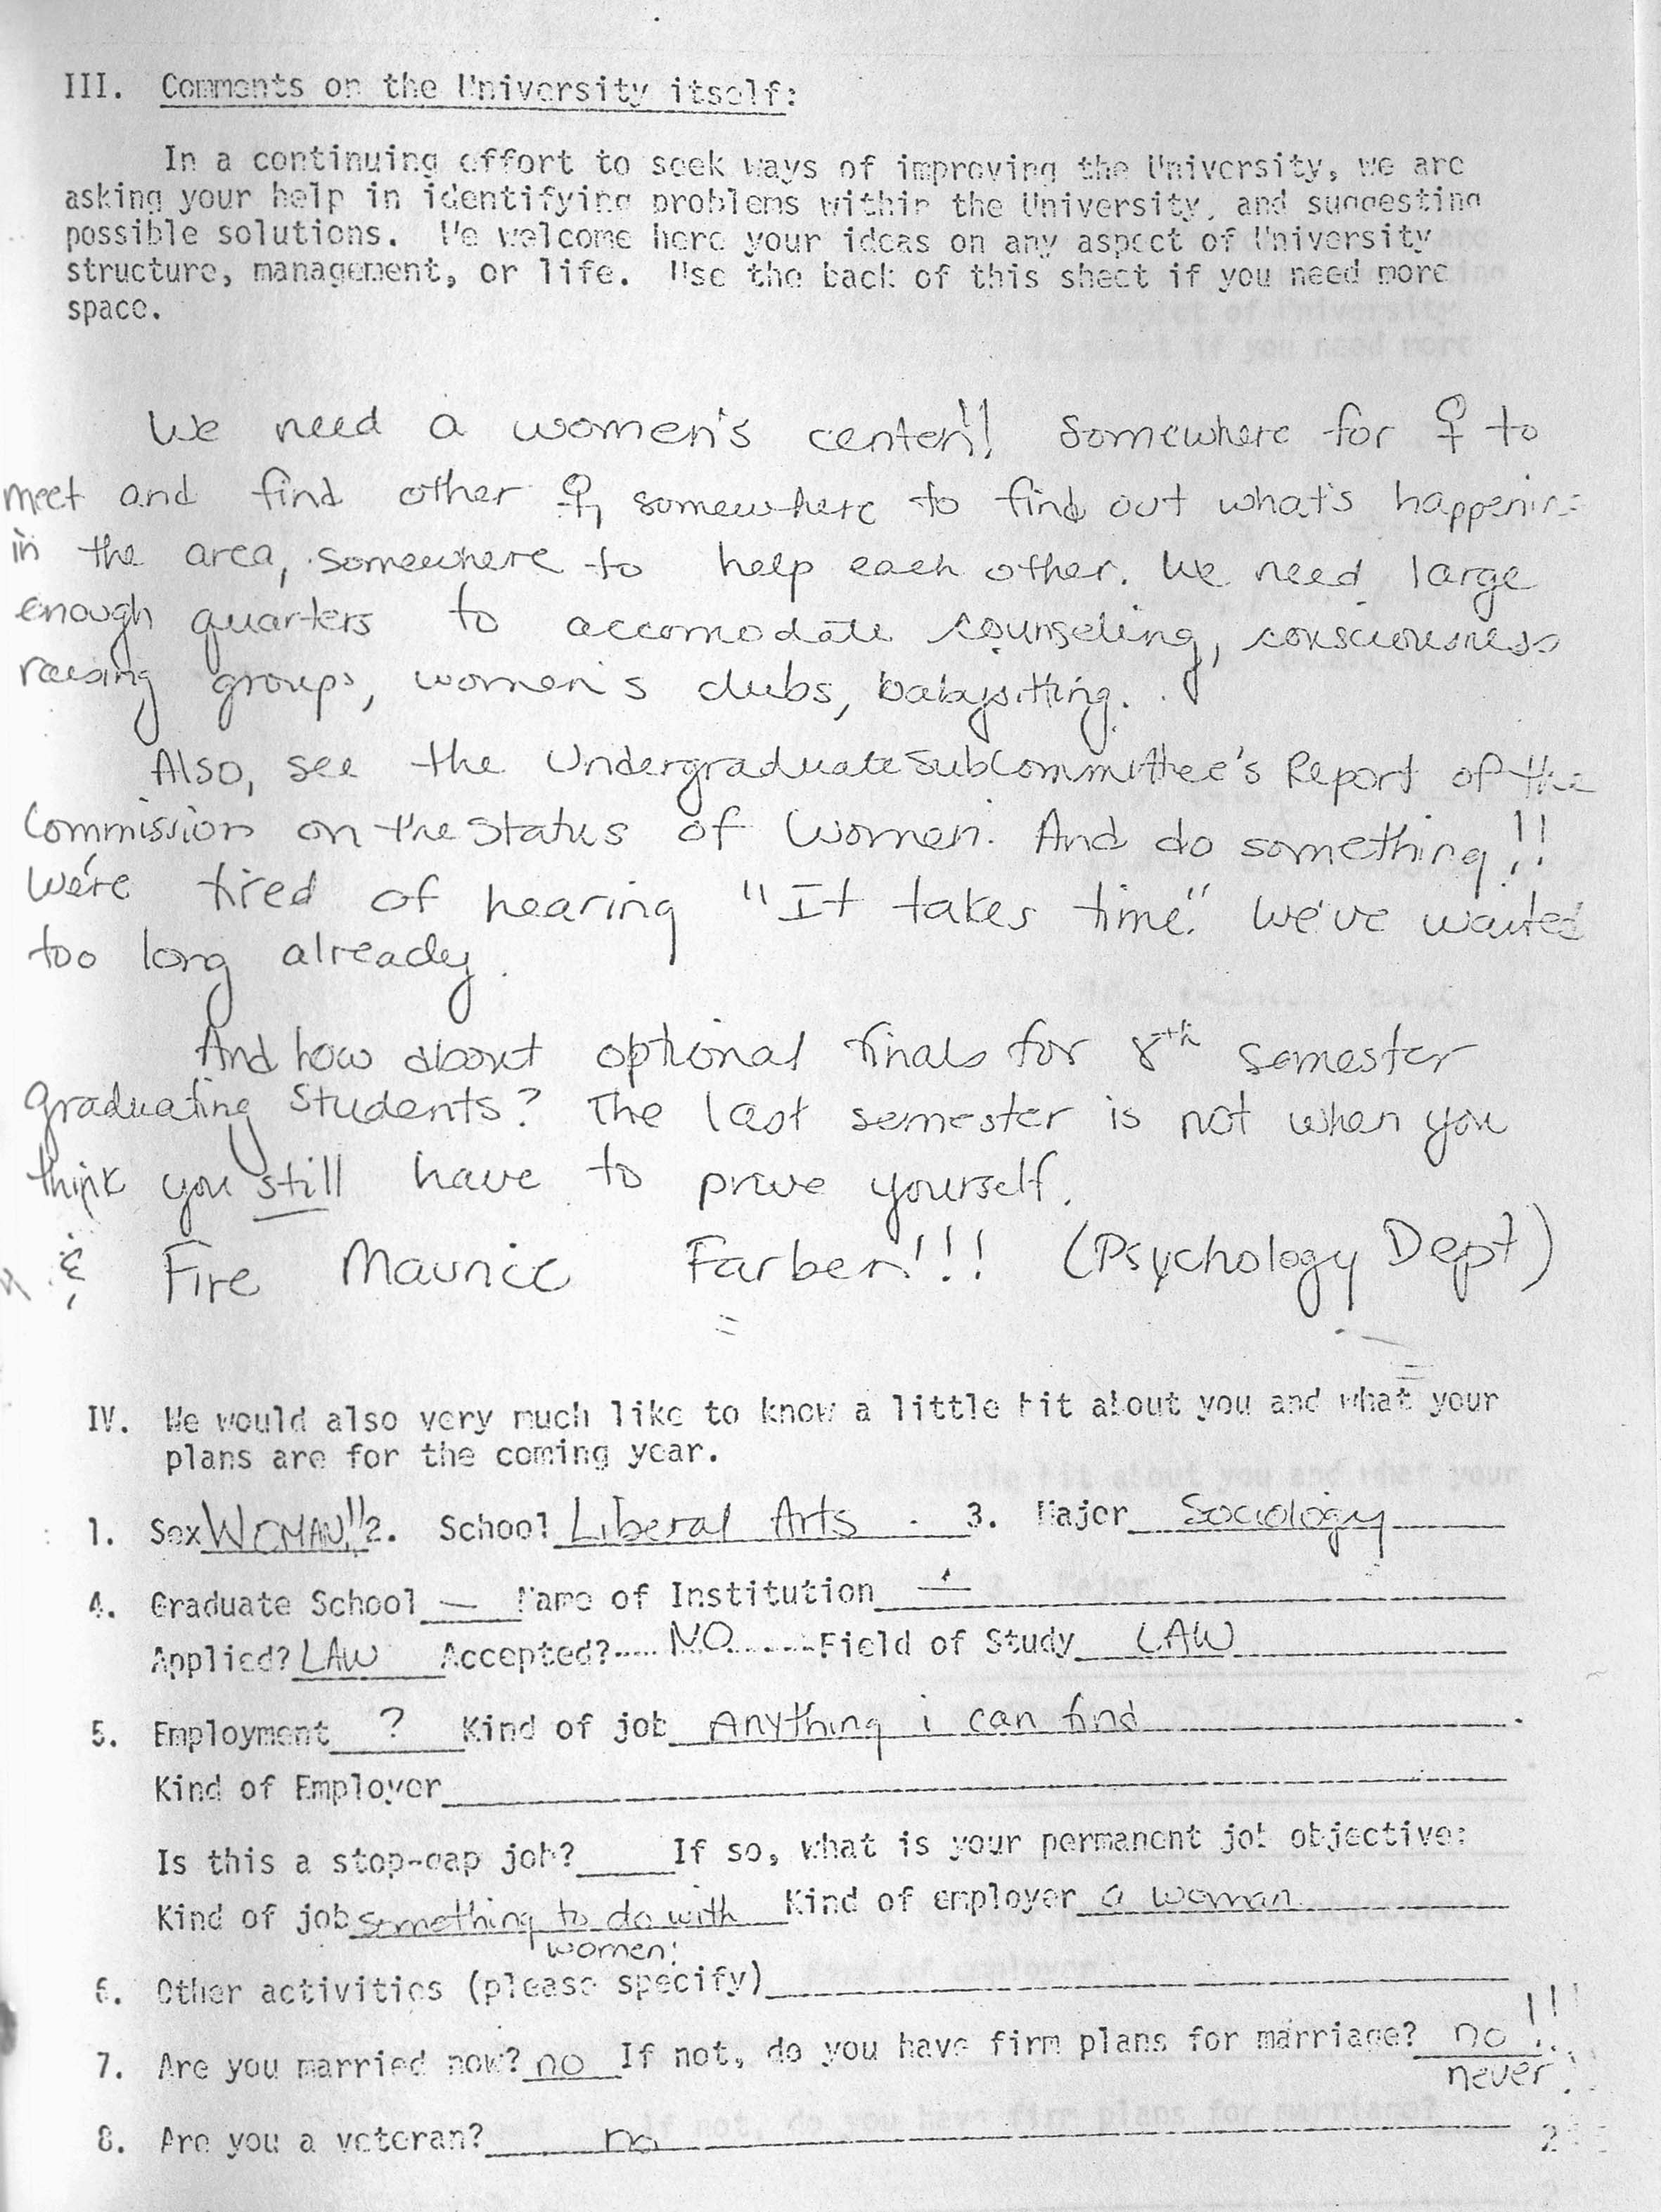 Page from UConn Senior Survey, 1972